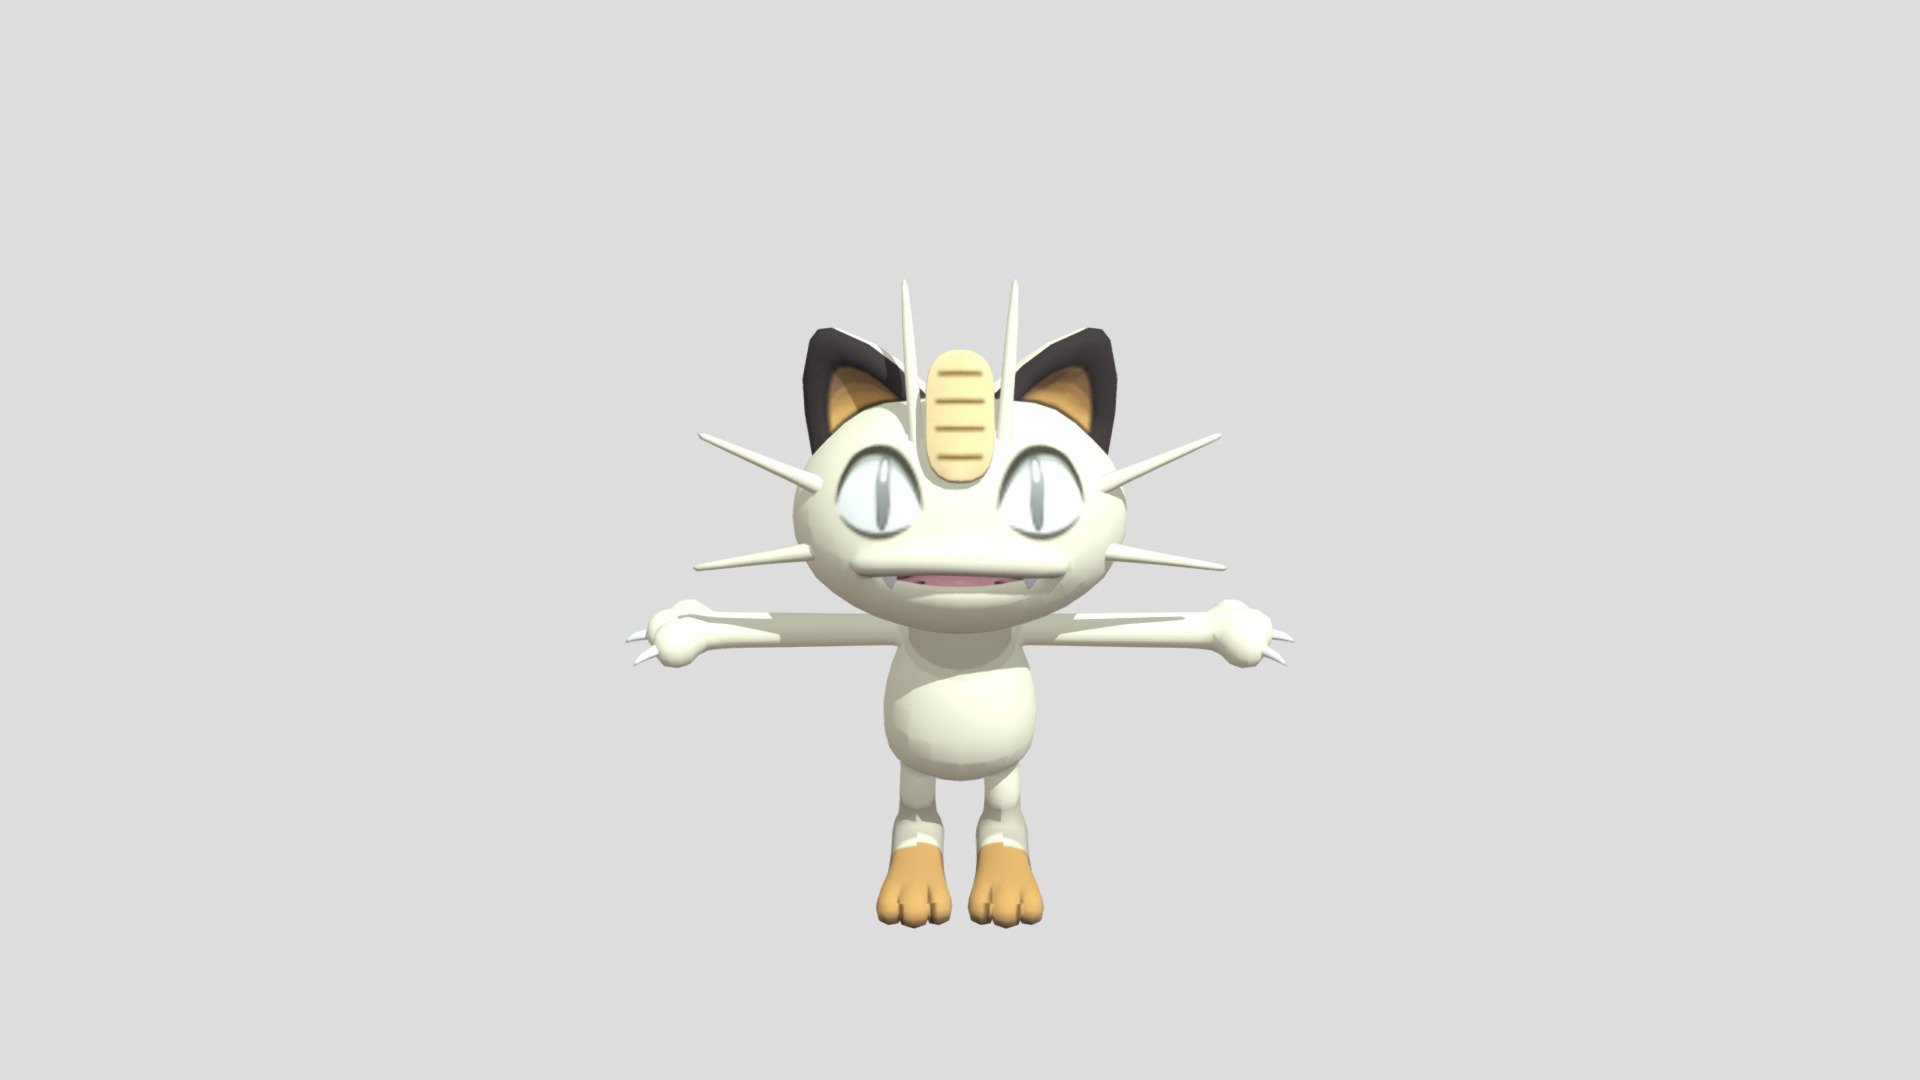 Scratch Cat Pokémon
Meowth withdraws its sharp claws into its paws to slinkily sneak about without making any incriminating footsteps. For some reason, this Pokémon loves shiny coins that glitter with light 3d model